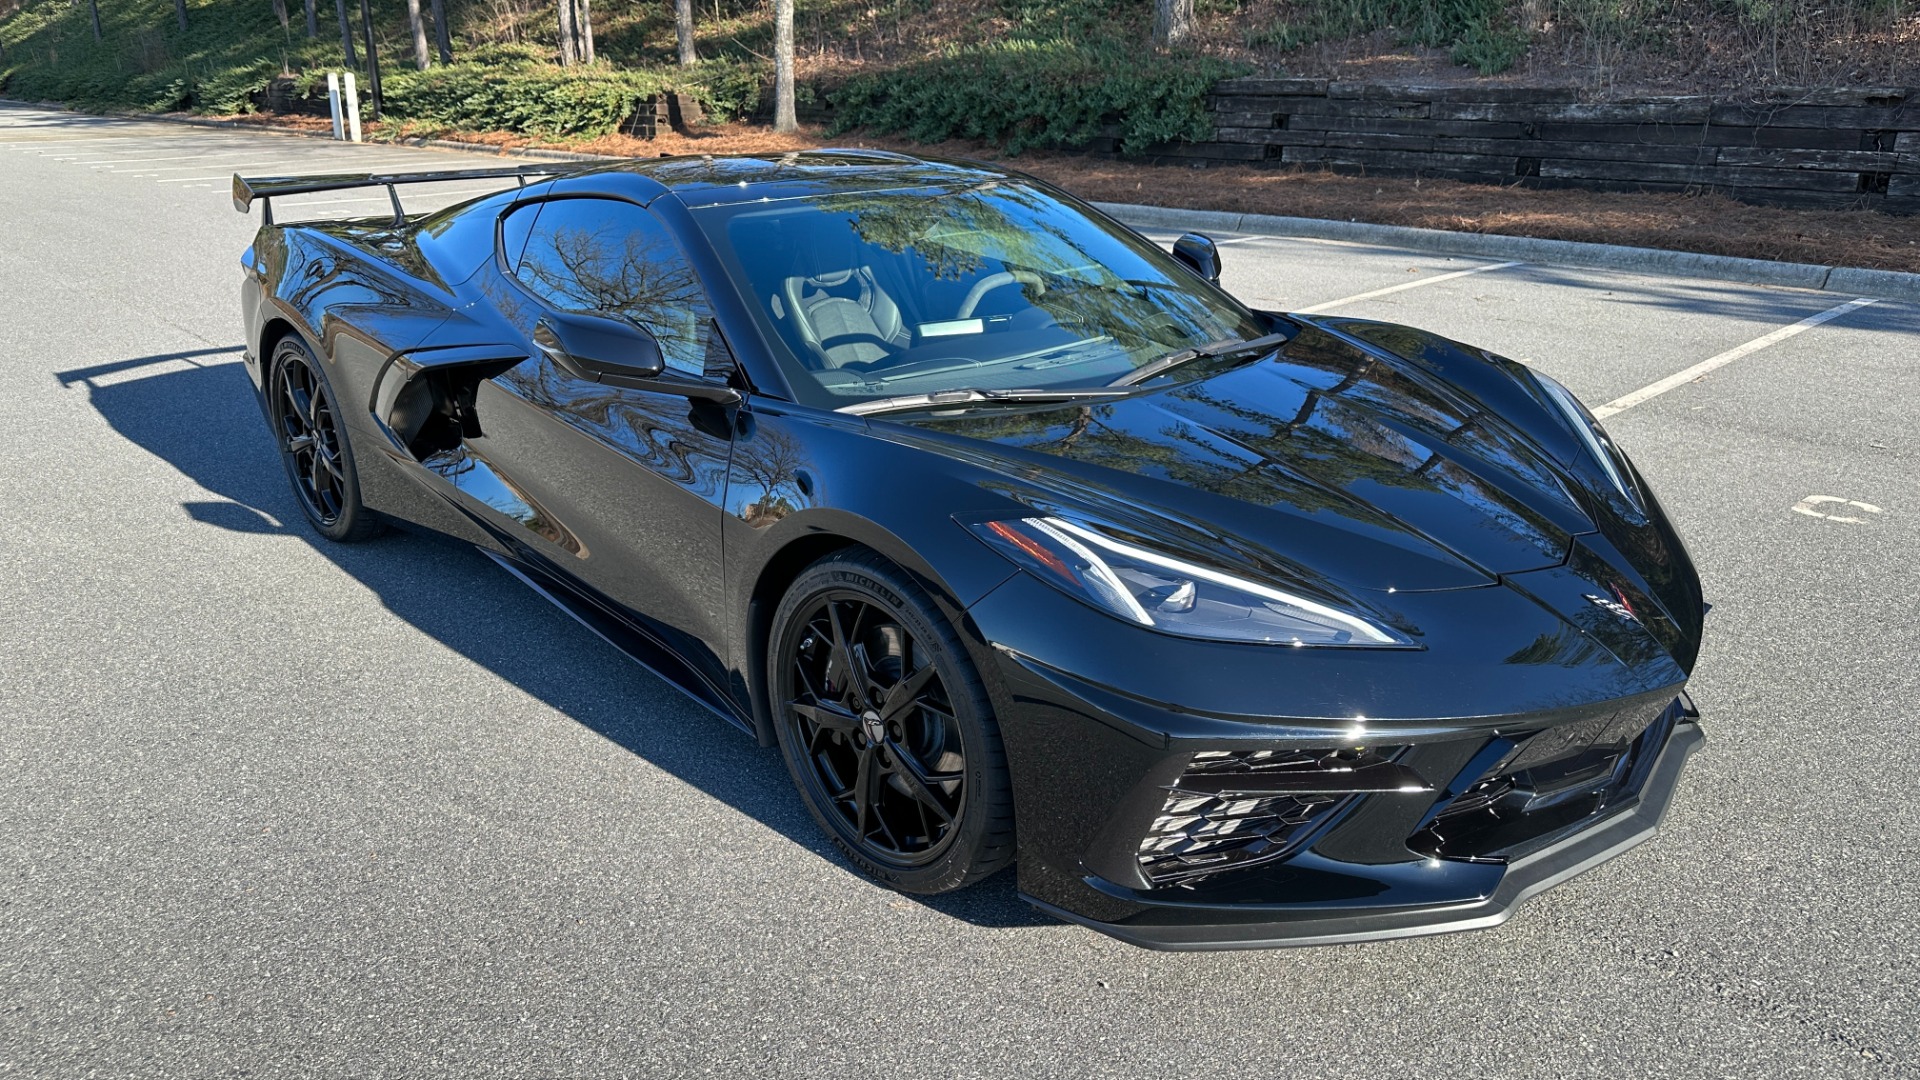 Used 2020 Chevrolet Corvette 3LT / Z51 PERFORMANCE PACKAGE / HIGH WING SPOILER / MAGRIDE / CARBON FIBER for sale Sold at Formula Imports in Charlotte NC 28227 6